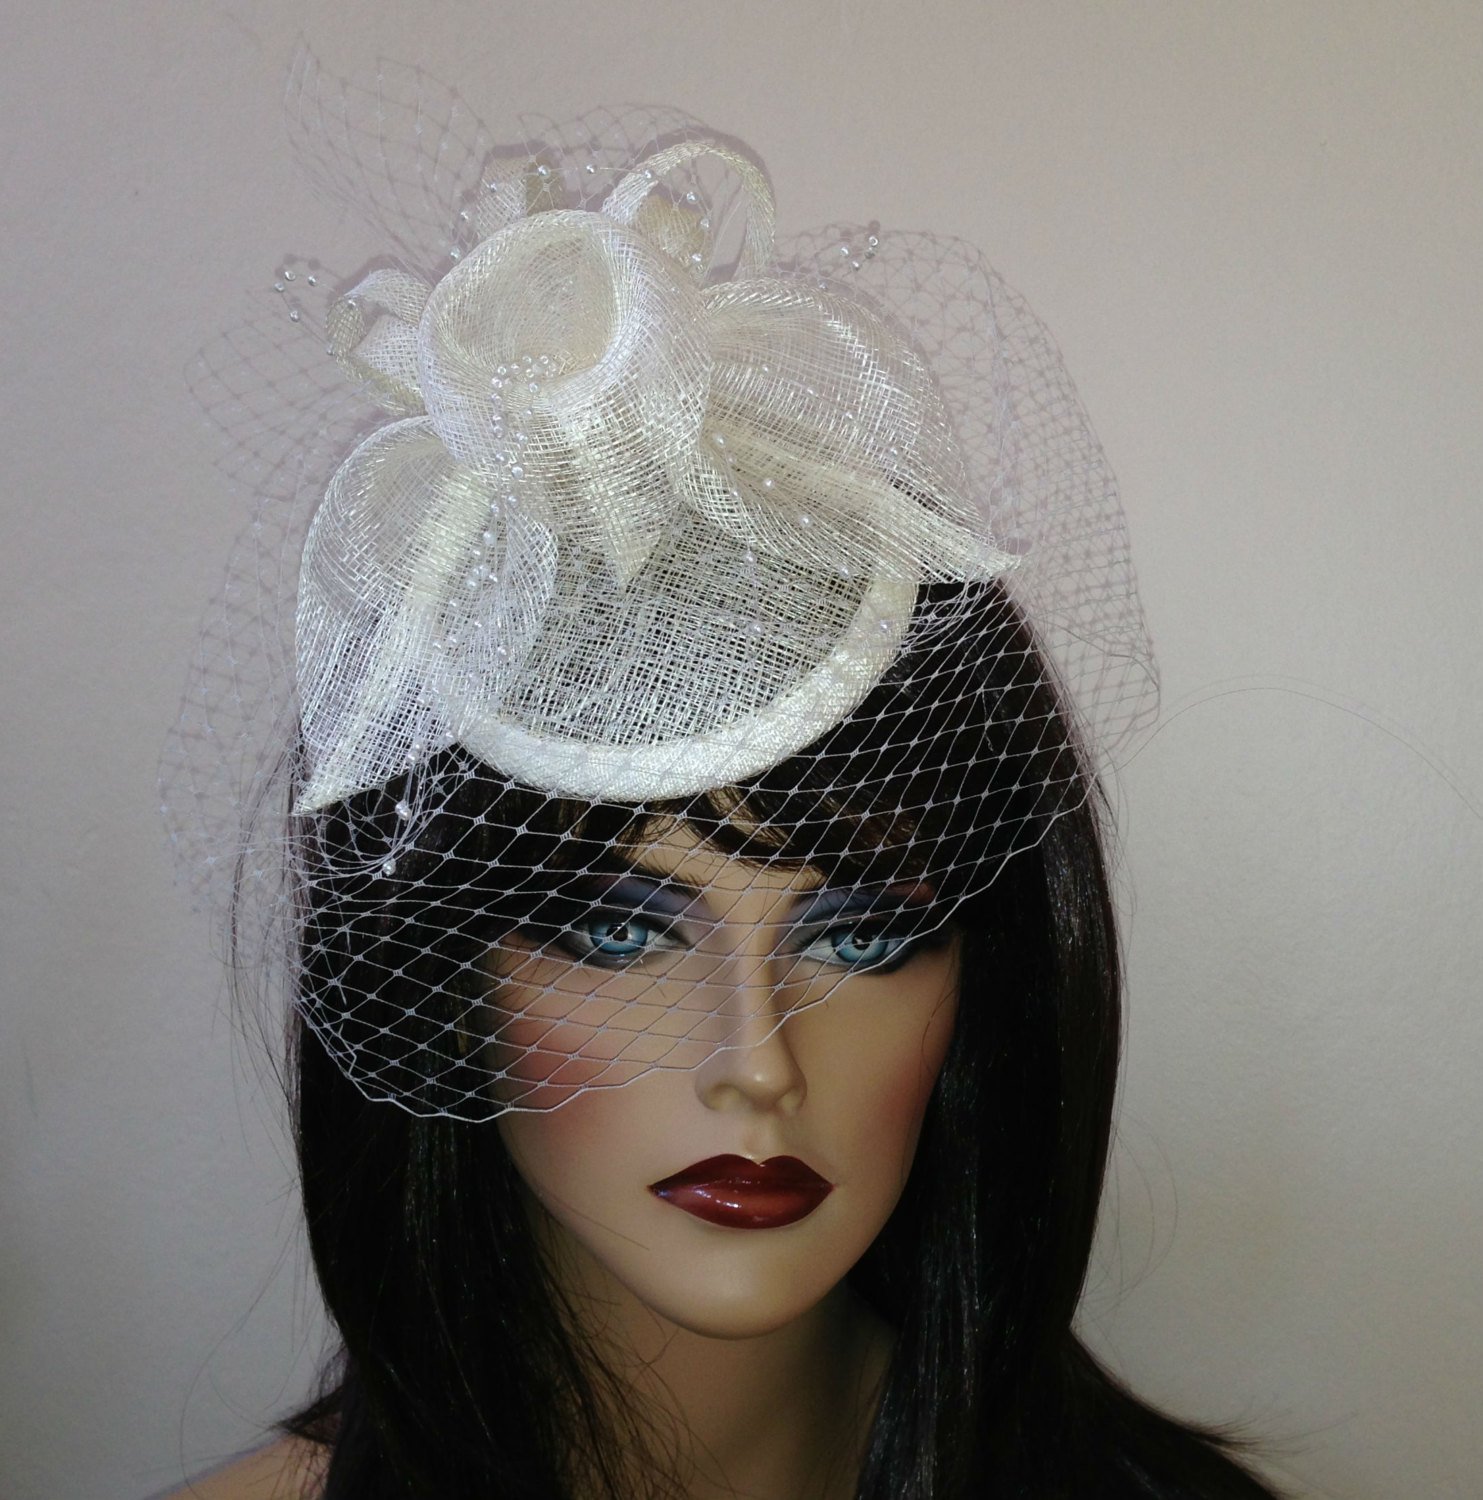 Bridal , Kentucky Derby, Bridesmade Fascinator  with Calla lillies, pearls and a veil.  Ivory hat.Wedding hair accessory